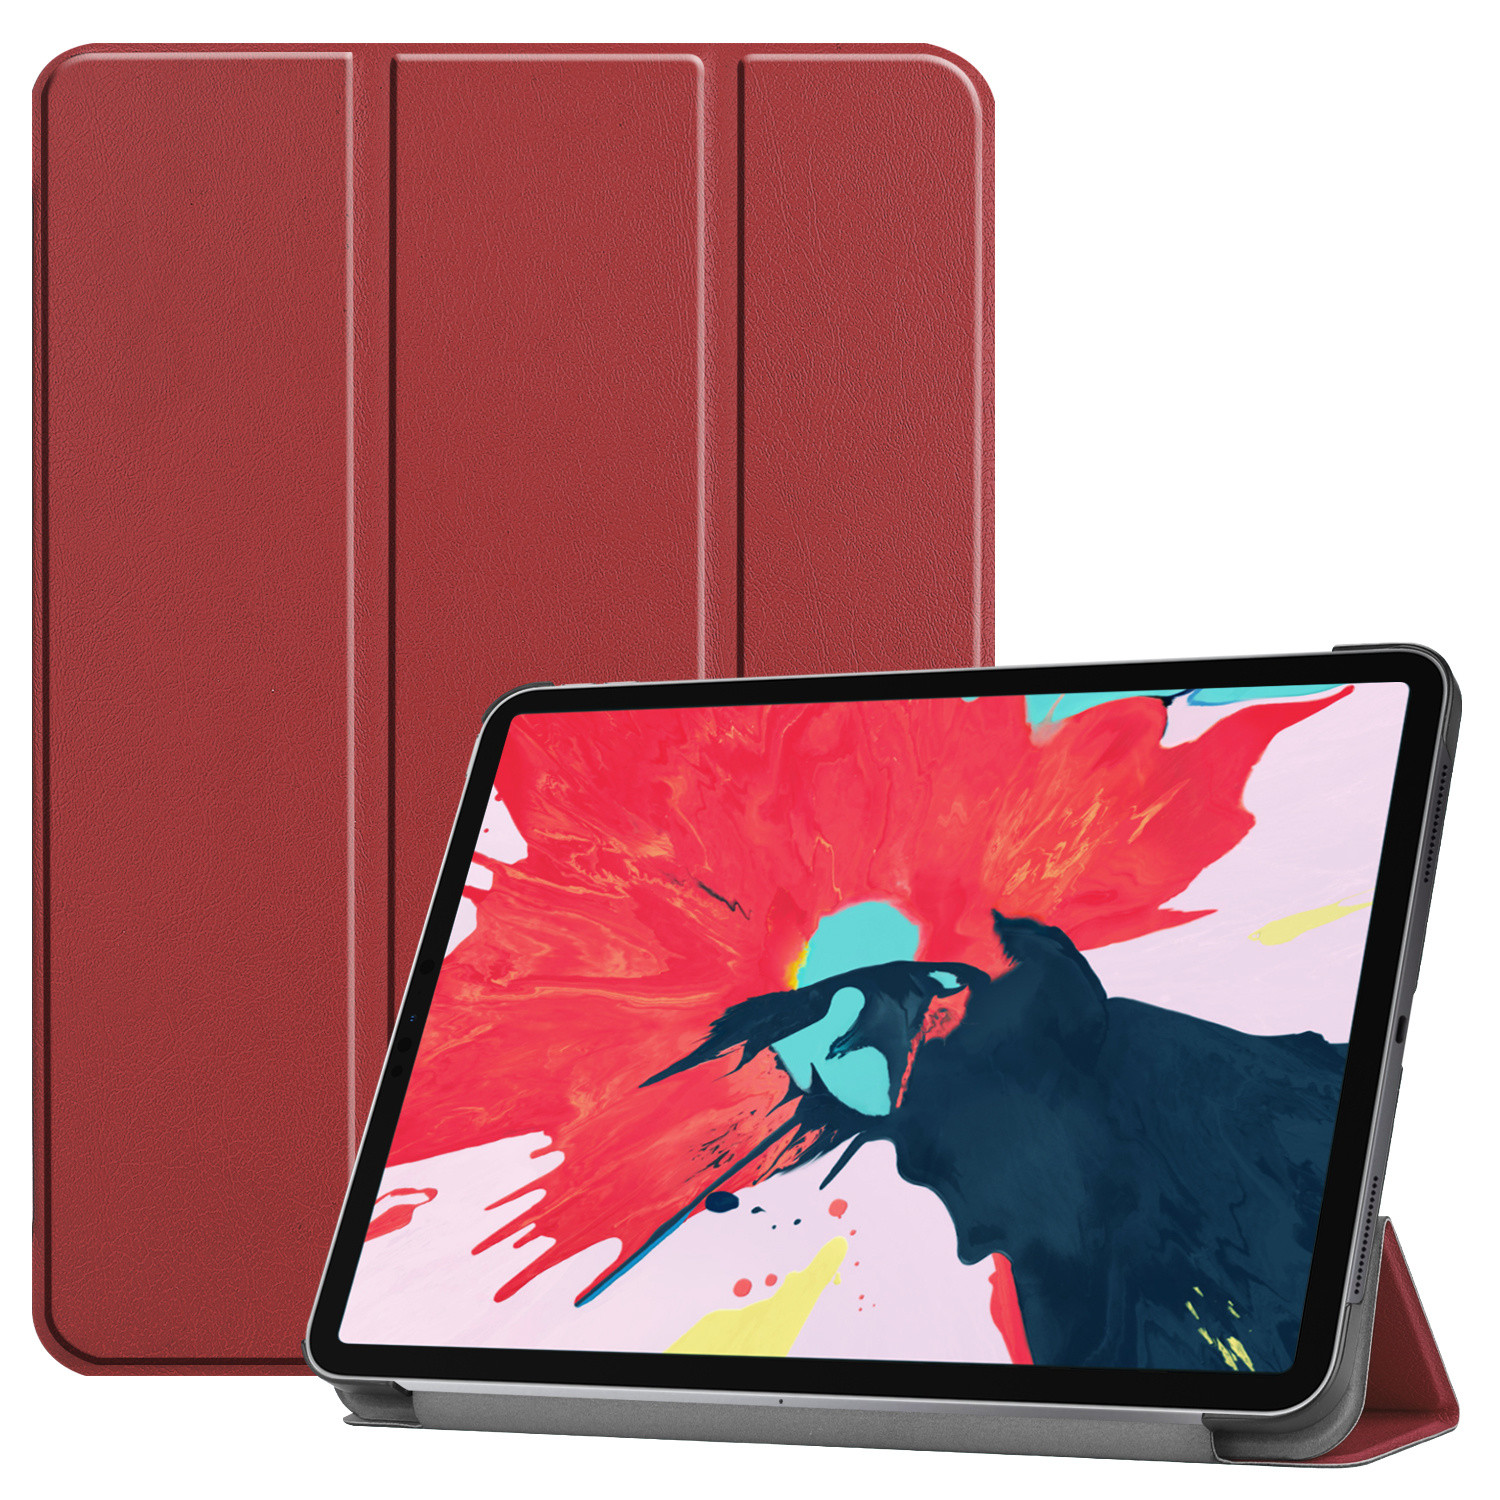 3-Vouw sleepcover hoes - iPad Pro 11 inch (2020) - Bordeaux Rood